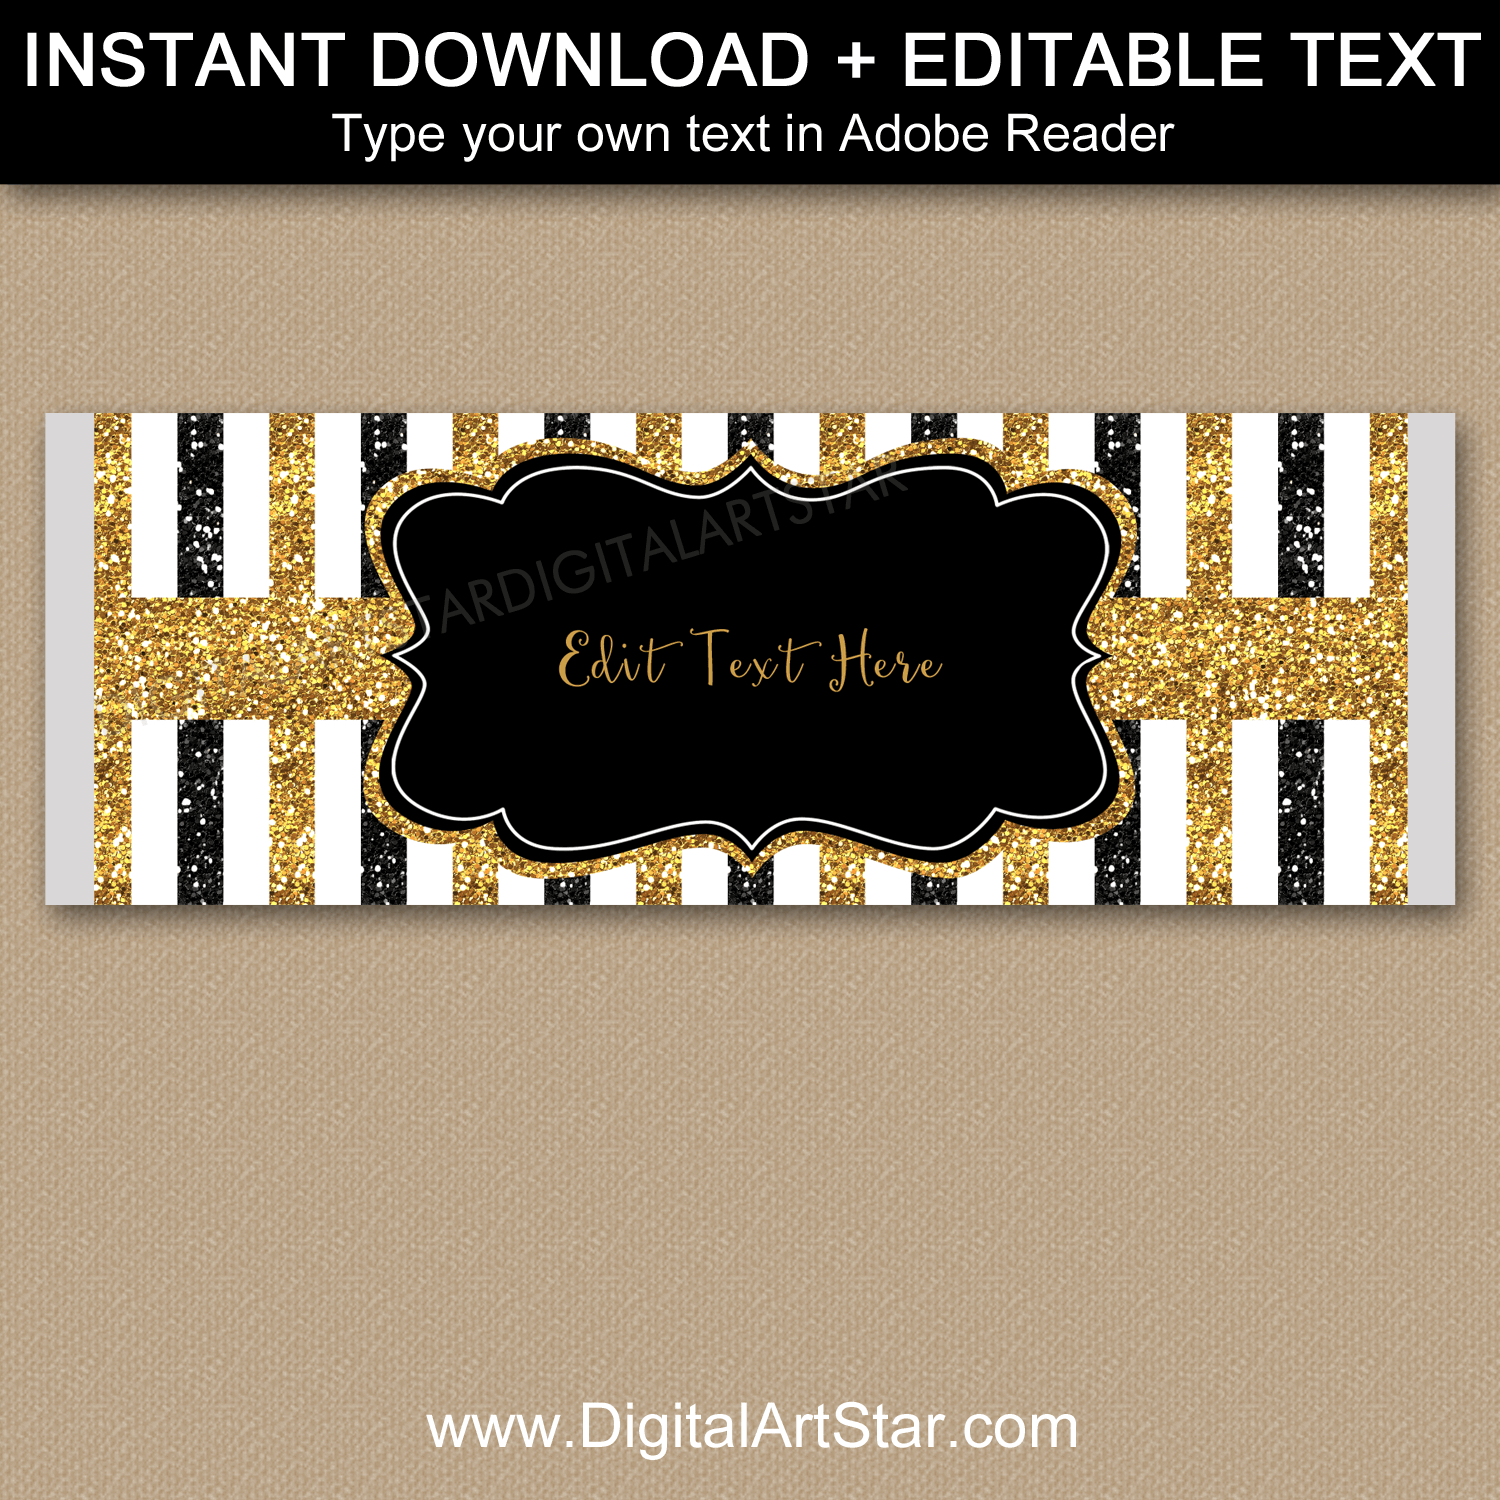 Printable Black and Gold Graduation Candy Bar Wrapper Template